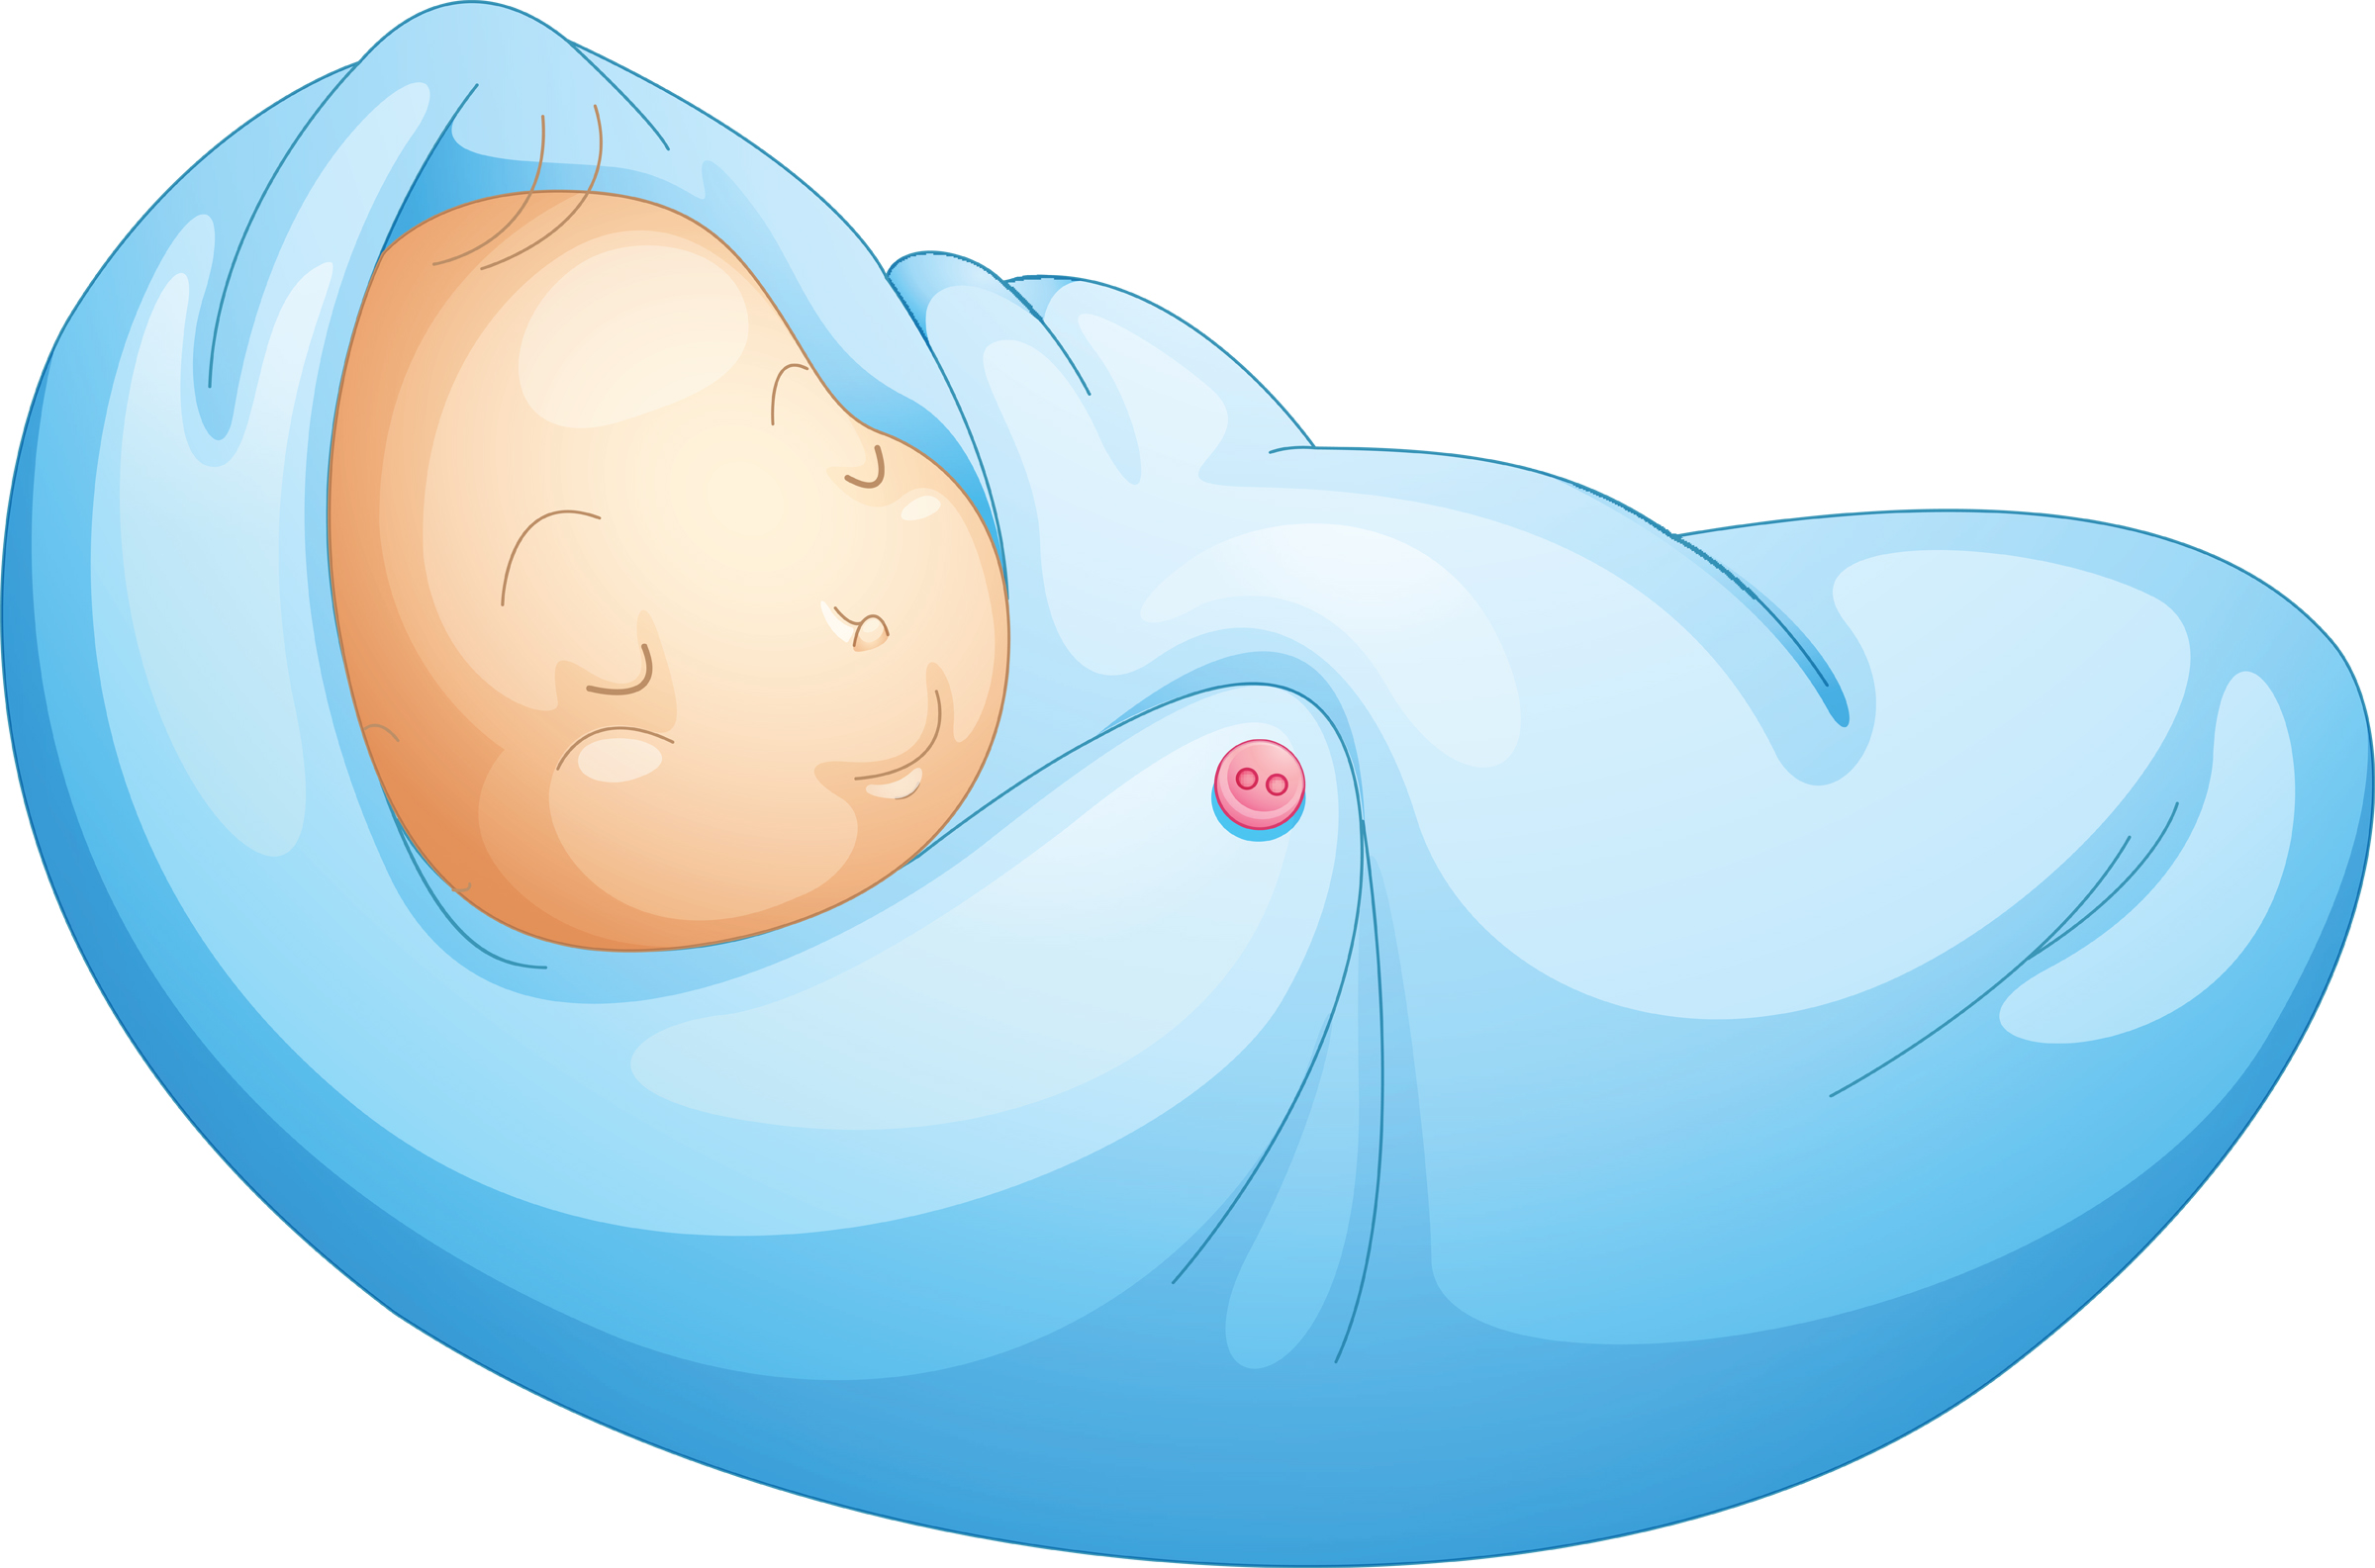 Baby Boy Clipart Born Baby Cl - Baby Boy Images Clip Art